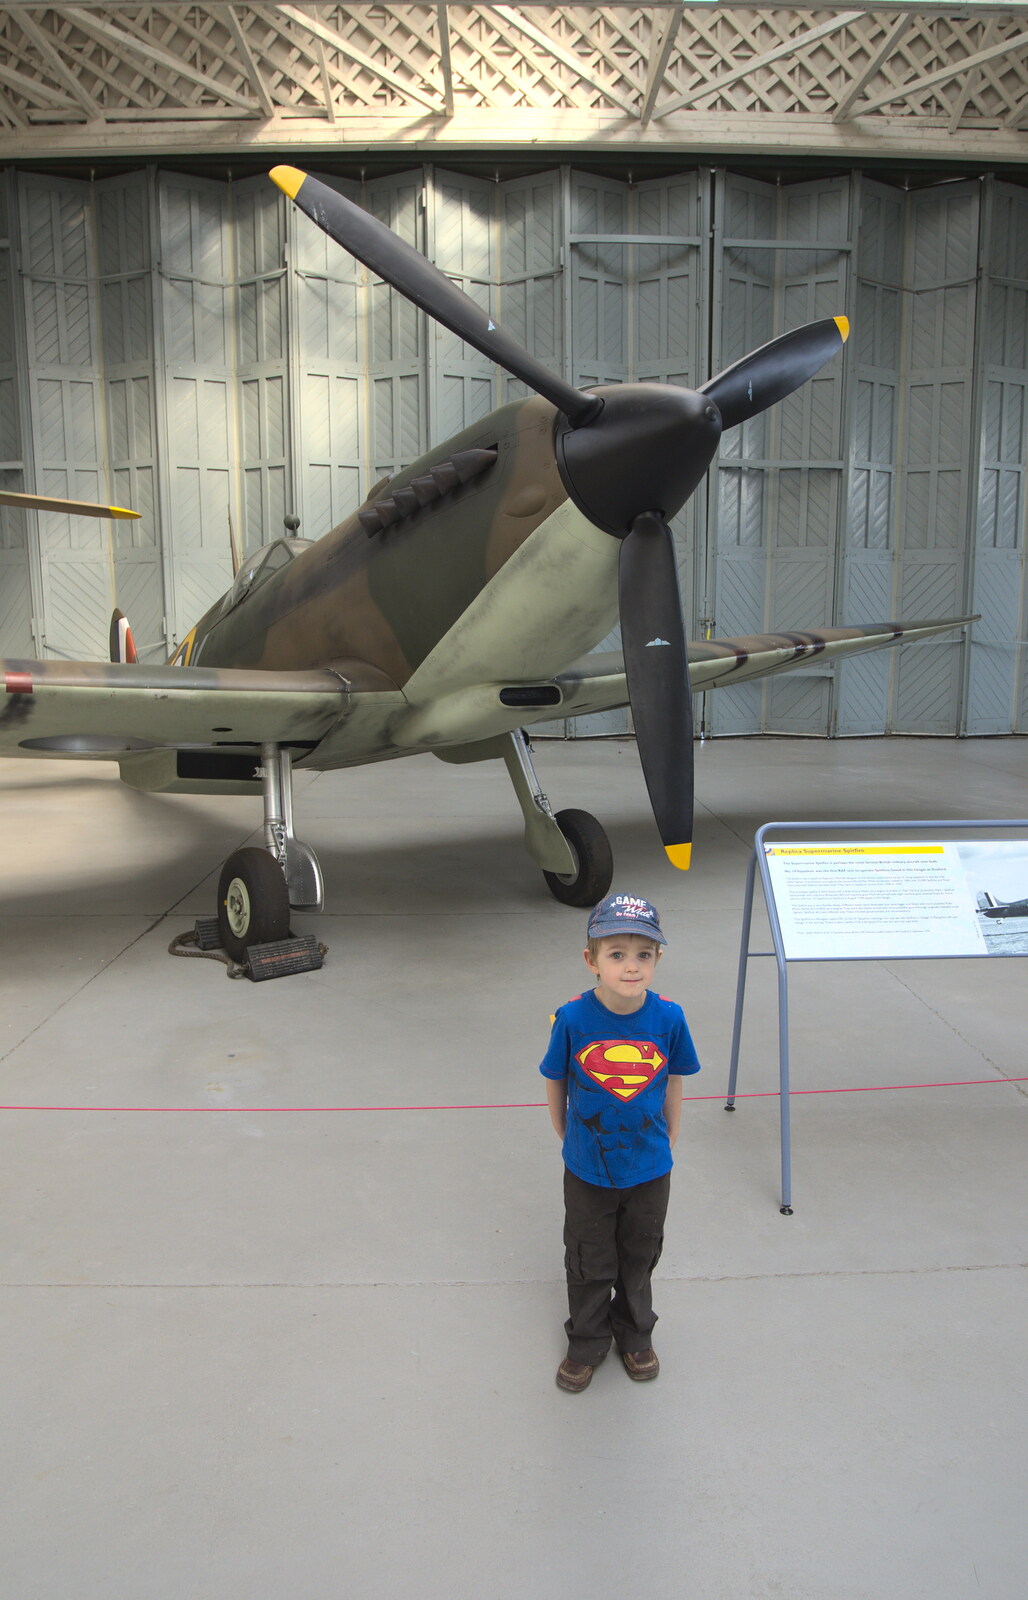 Fred stands in front of a Spitfire from A Day Out at Duxford, Cambridgeshire - 9th March 2014